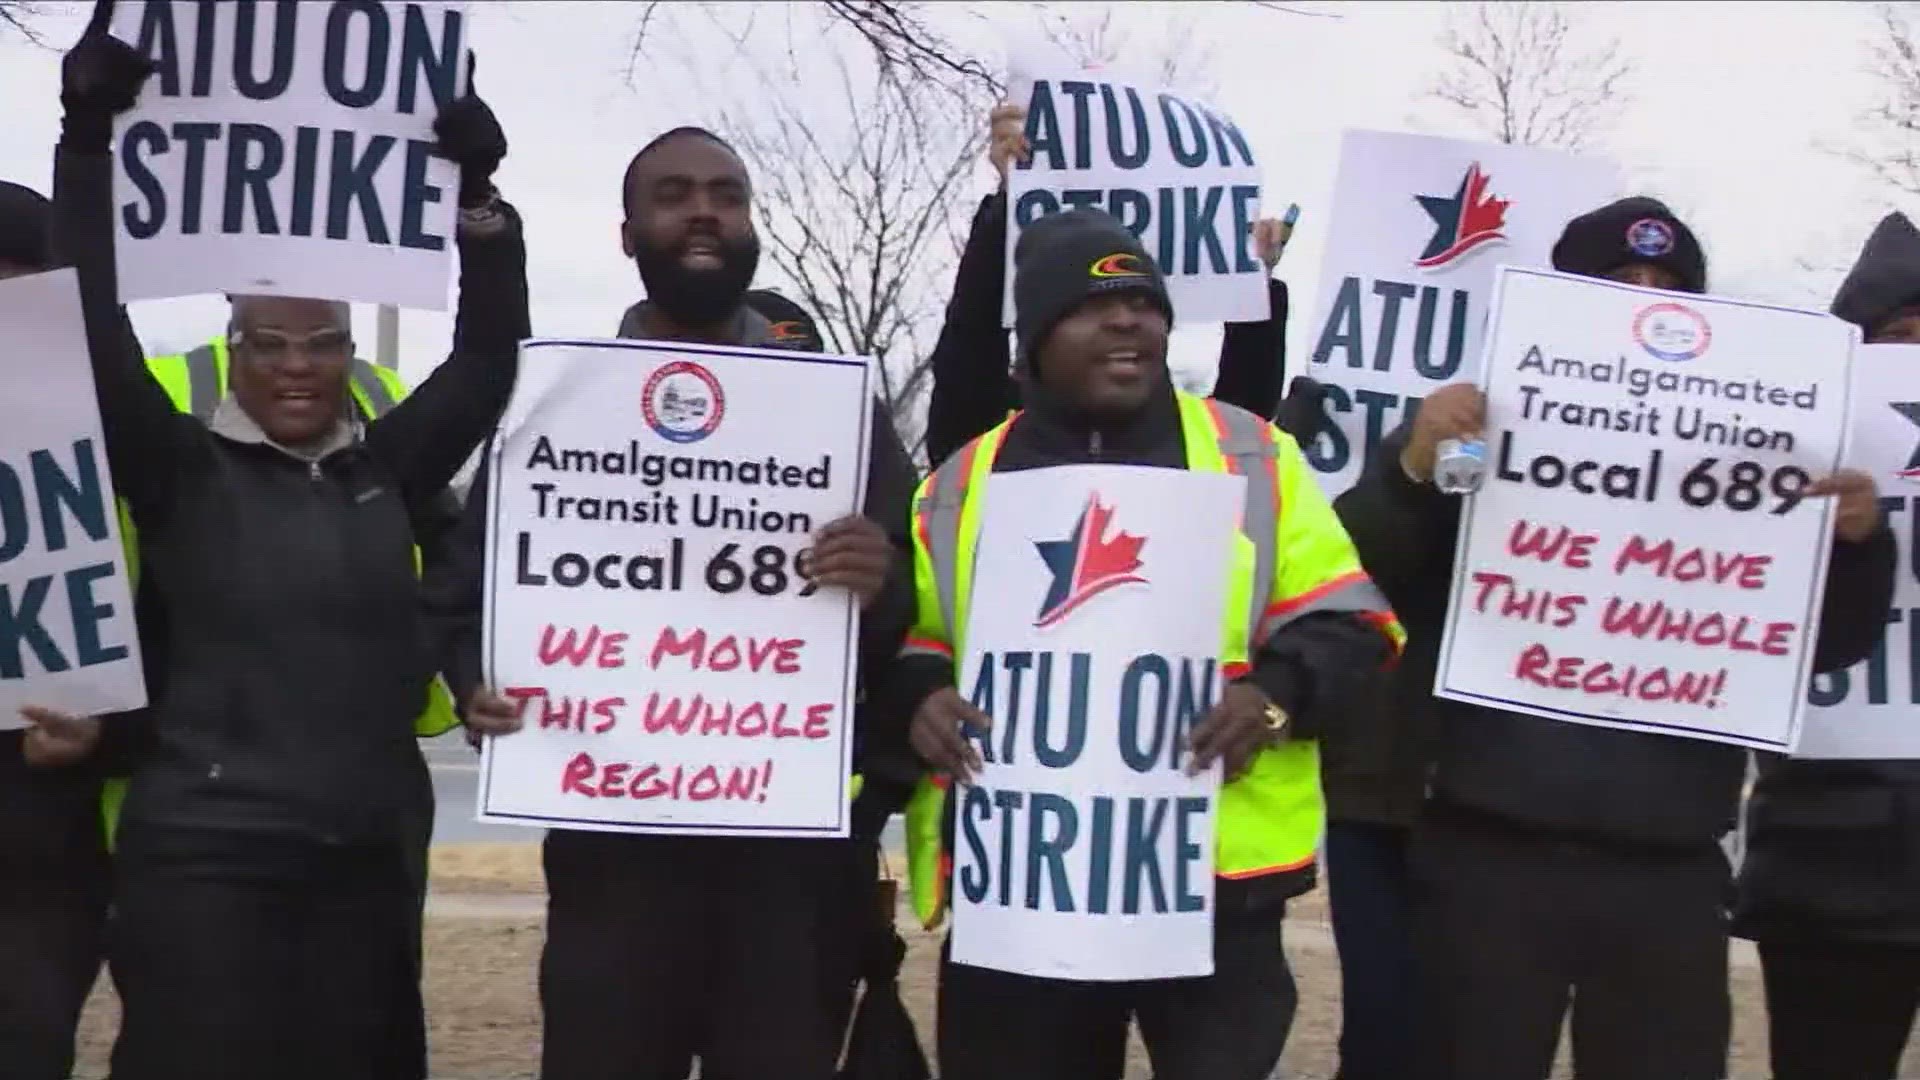 Those on strike are asking for better pay, more sick leave, and a retirement plan.